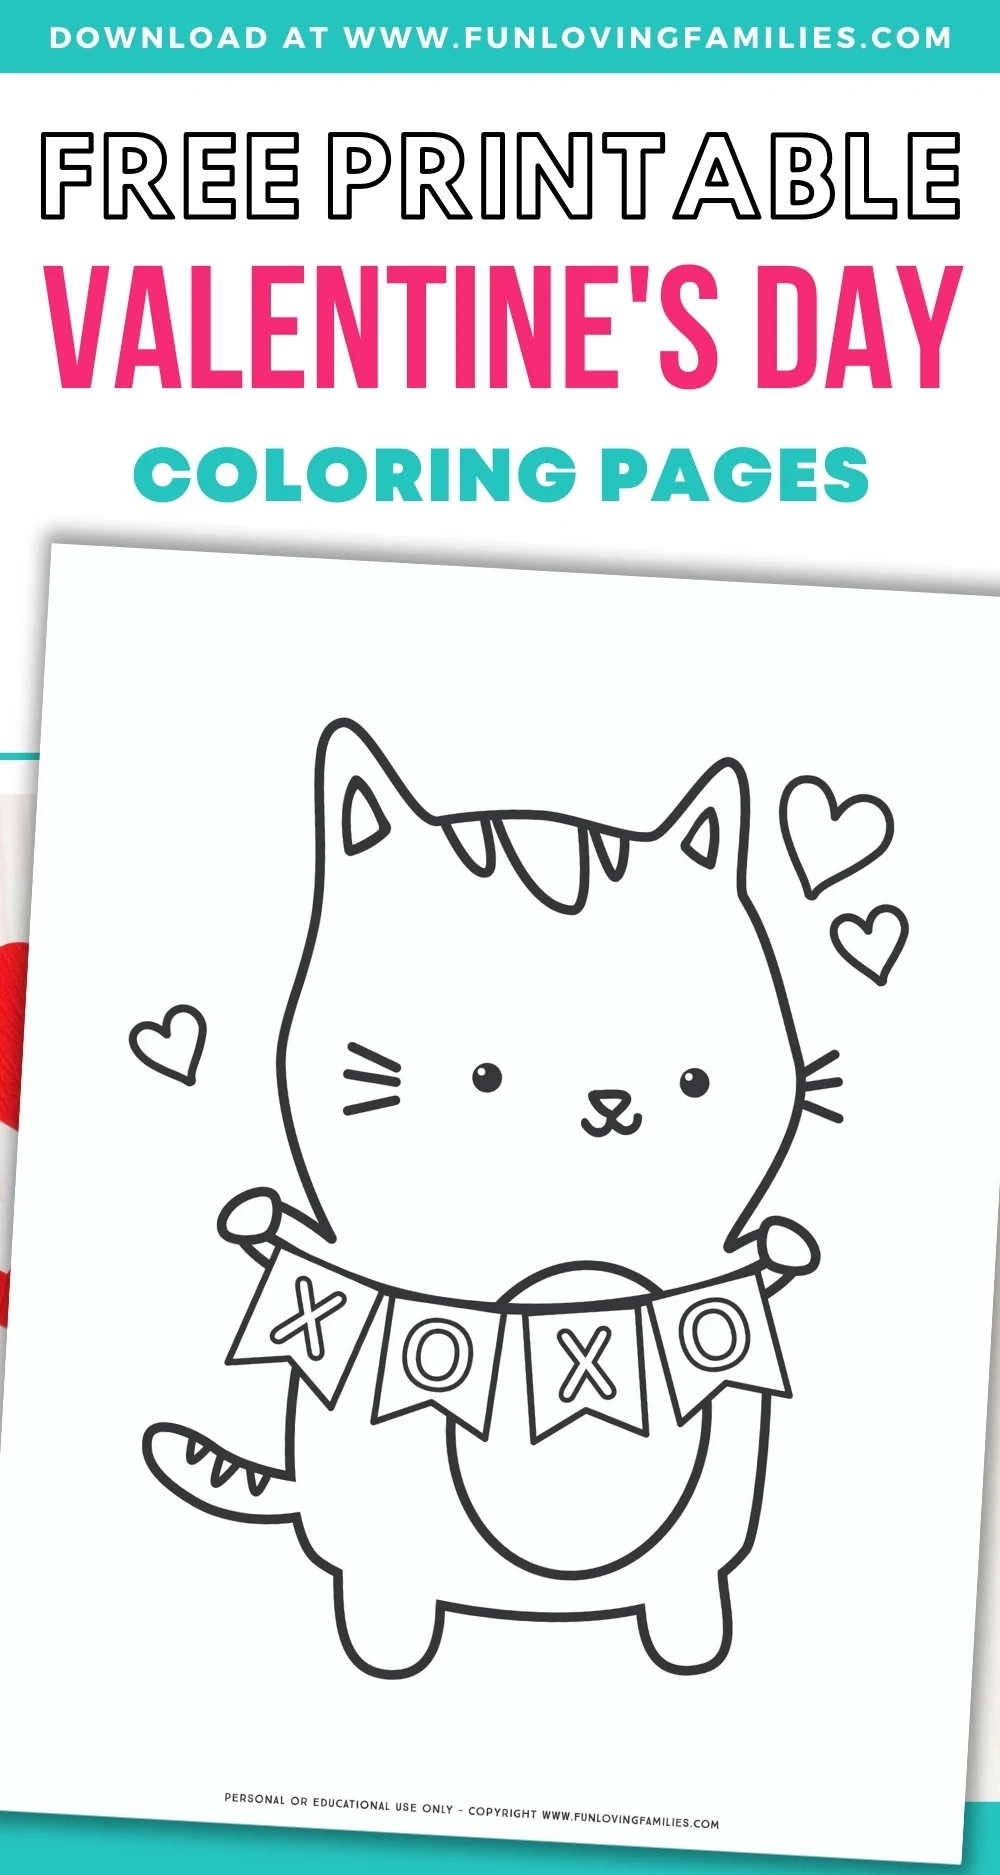 Valentine's Day Coloring Pages   Fun Loving Families